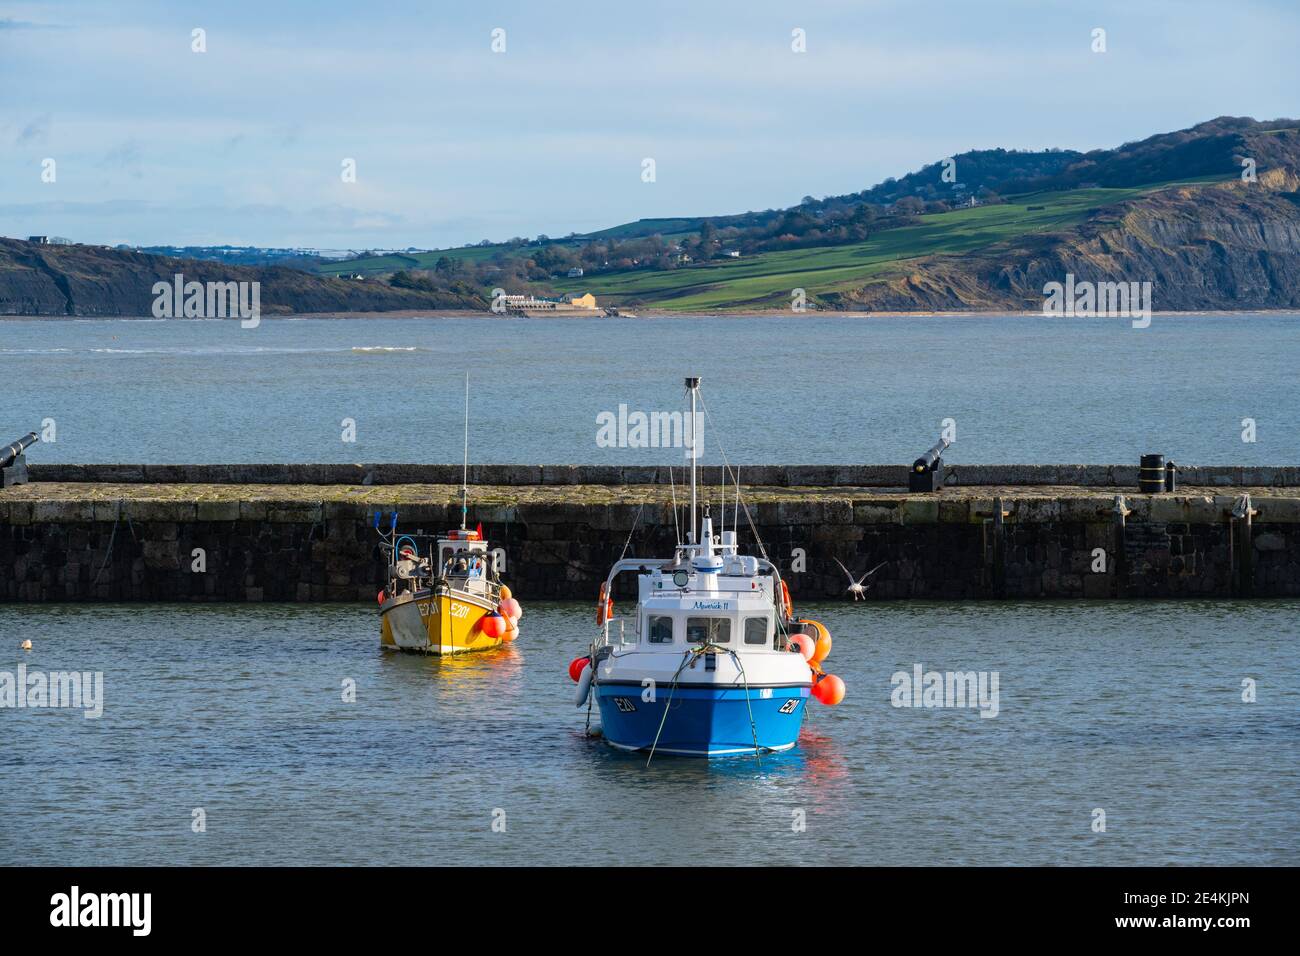 Lyme Regis, Dorset, UK. 24th Jan, 2021. UK Weather: A bright, sunny and cold day at the seaside resort town of Lyme Regis. Boats in Lyme Regis harbour during the third national lockdown. Credit: Celia McMahon/Alamy Live News Stock Photo